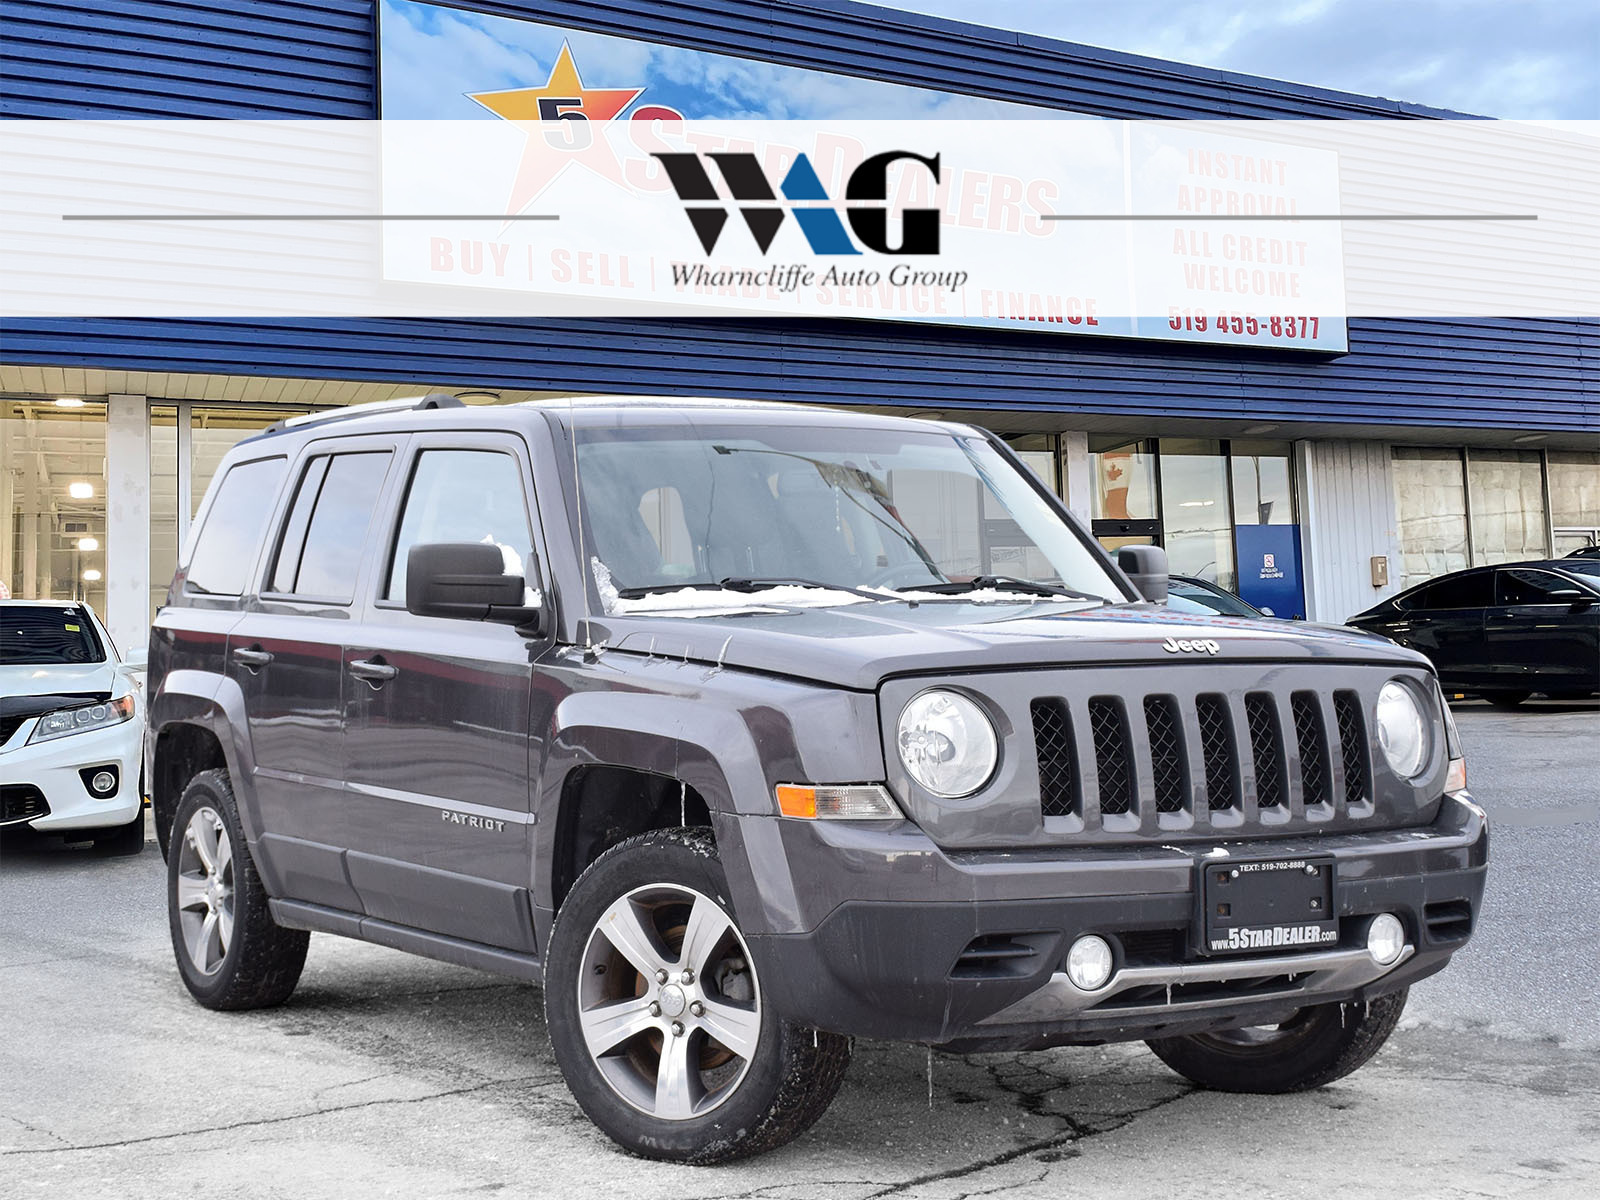 2016 Jeep Patriot AWD LEATHER SUNROOF LOADED! WE FINANCE ALL CREDIT!